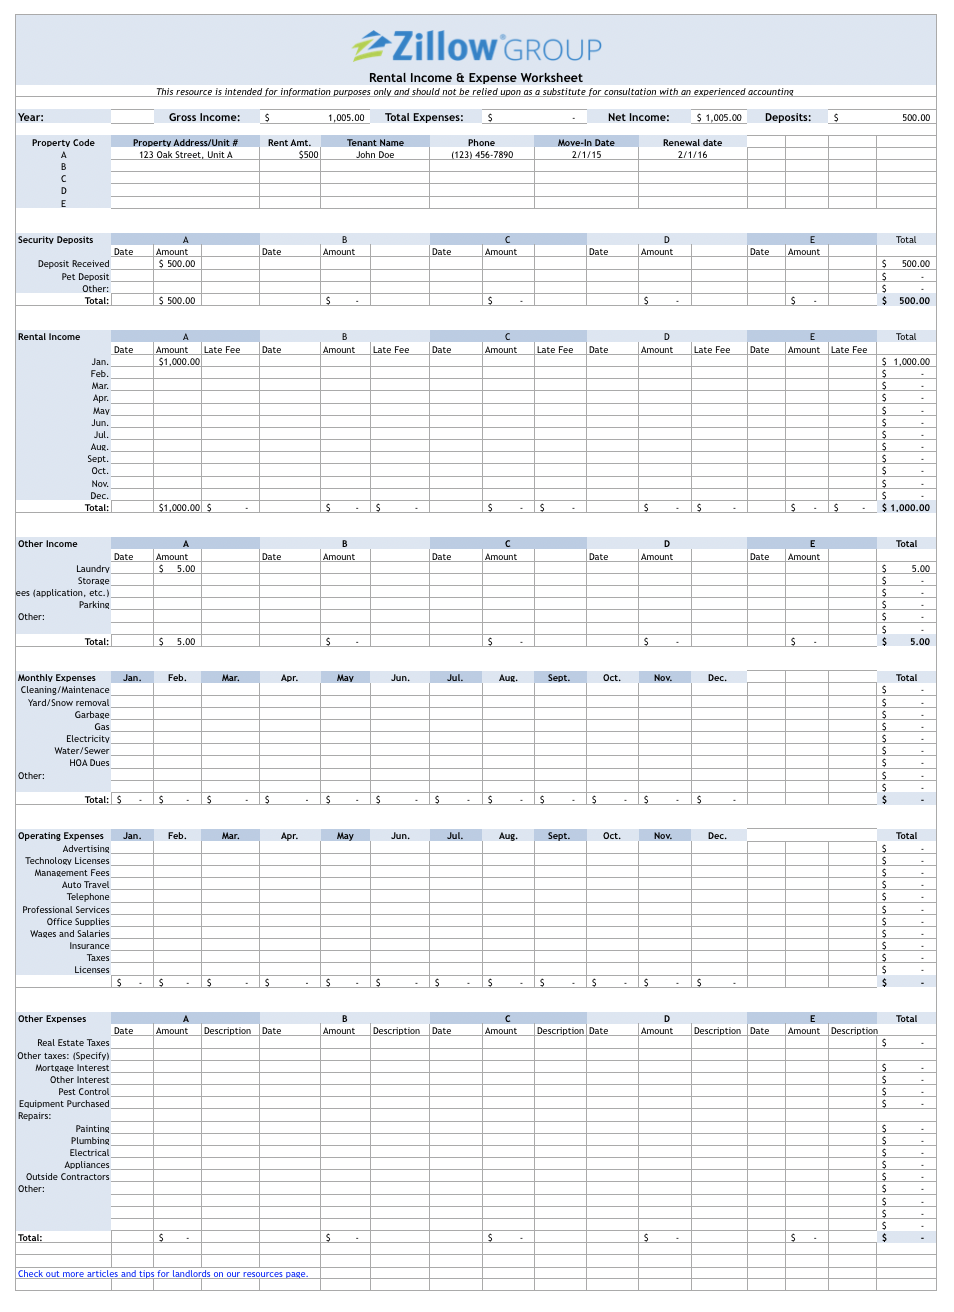 Zillow Spreadsheet Rental Income & Expense Worksheet